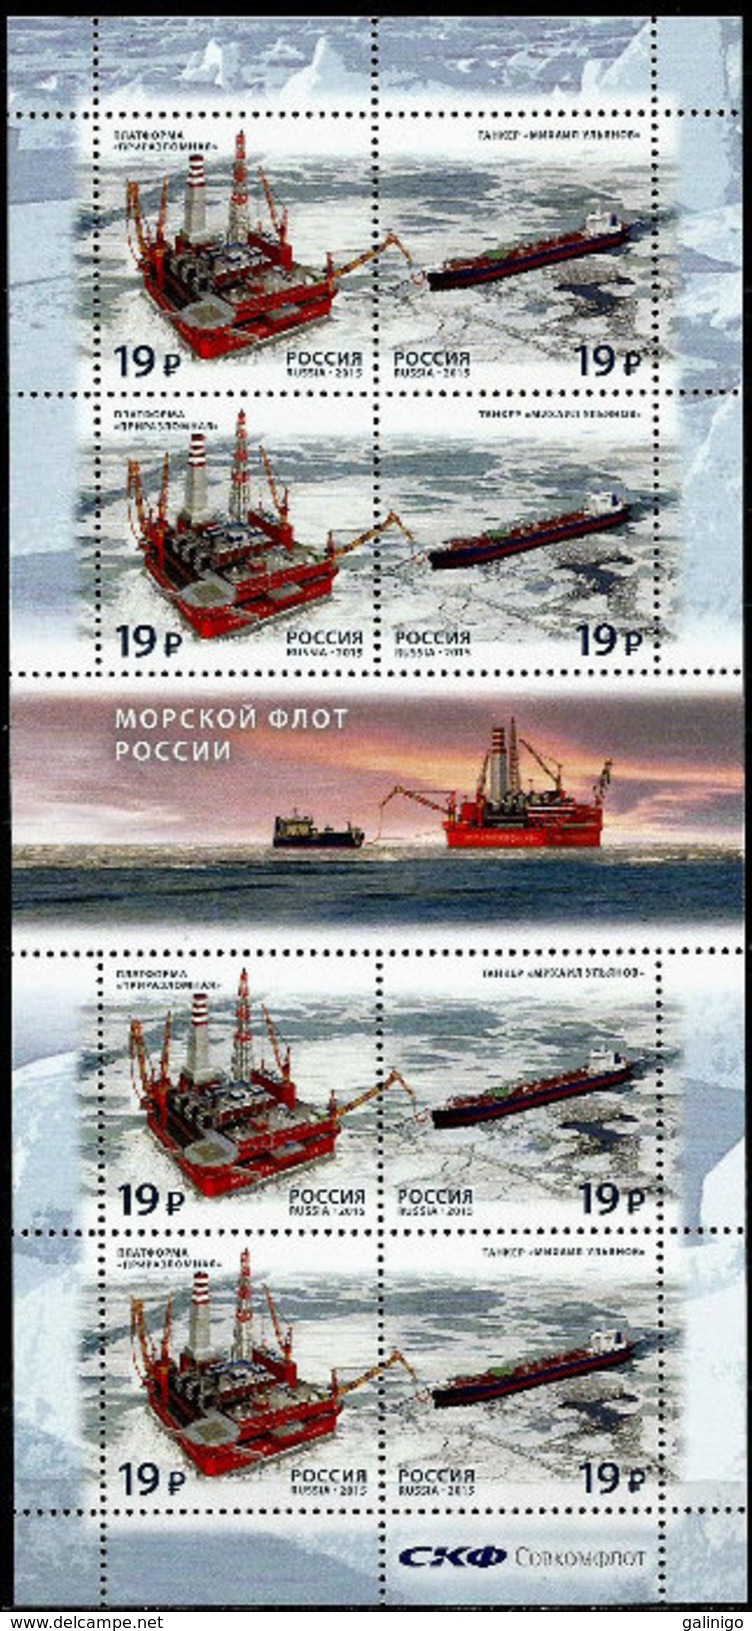 2015 M/S Russia Russland Russie Rusia Fleet-Ice-resistant Oil Platform And Tanker-ships Mi 2221-2222 MNH ** - Feuilles Complètes